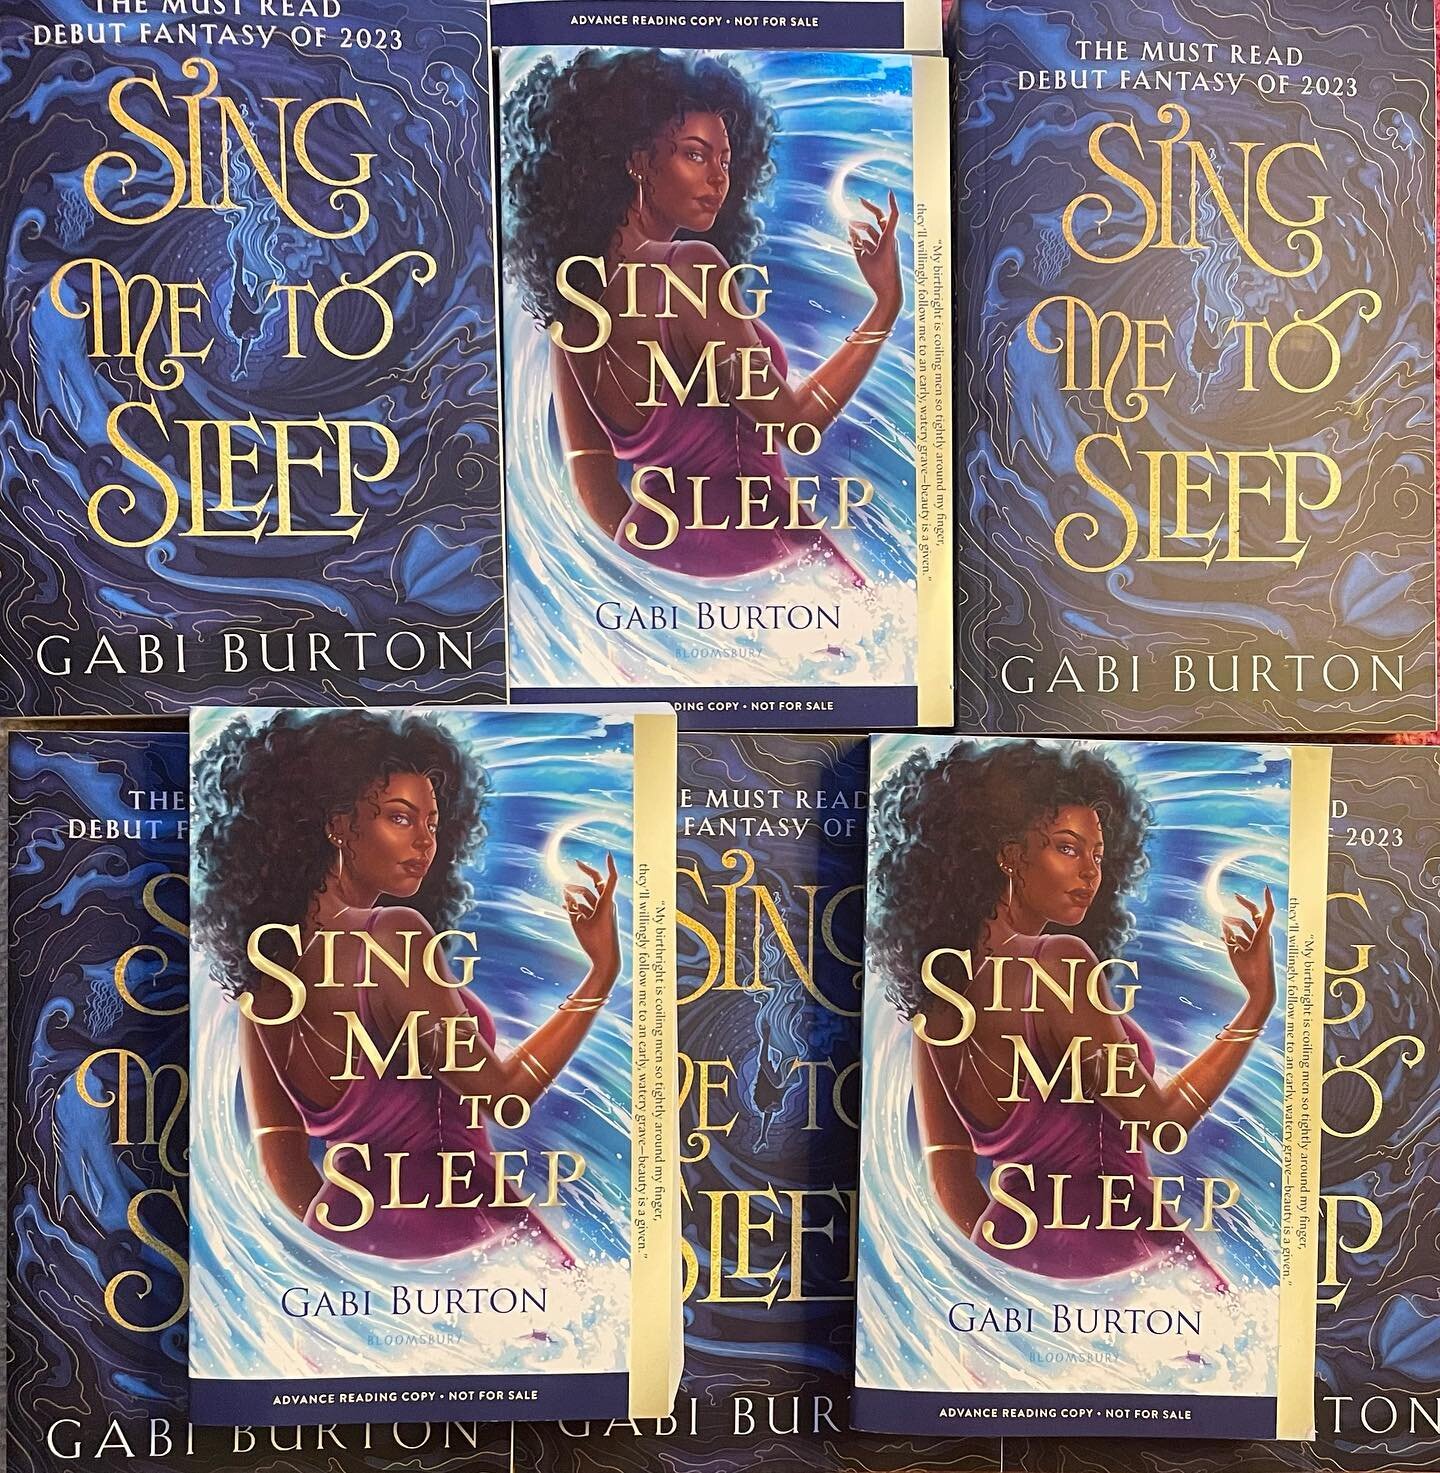 GIVEAWAY ALERT! Enter to win a physical ARC of SING ME TO SLEEP! 

To enter:
✨Follow me!
✨Tag a friend in the comments
✨Add to goodreads
(For a bonus entry, add this post to your story and make sure to tag me so I see it)

Details: I&rsquo;m giving a